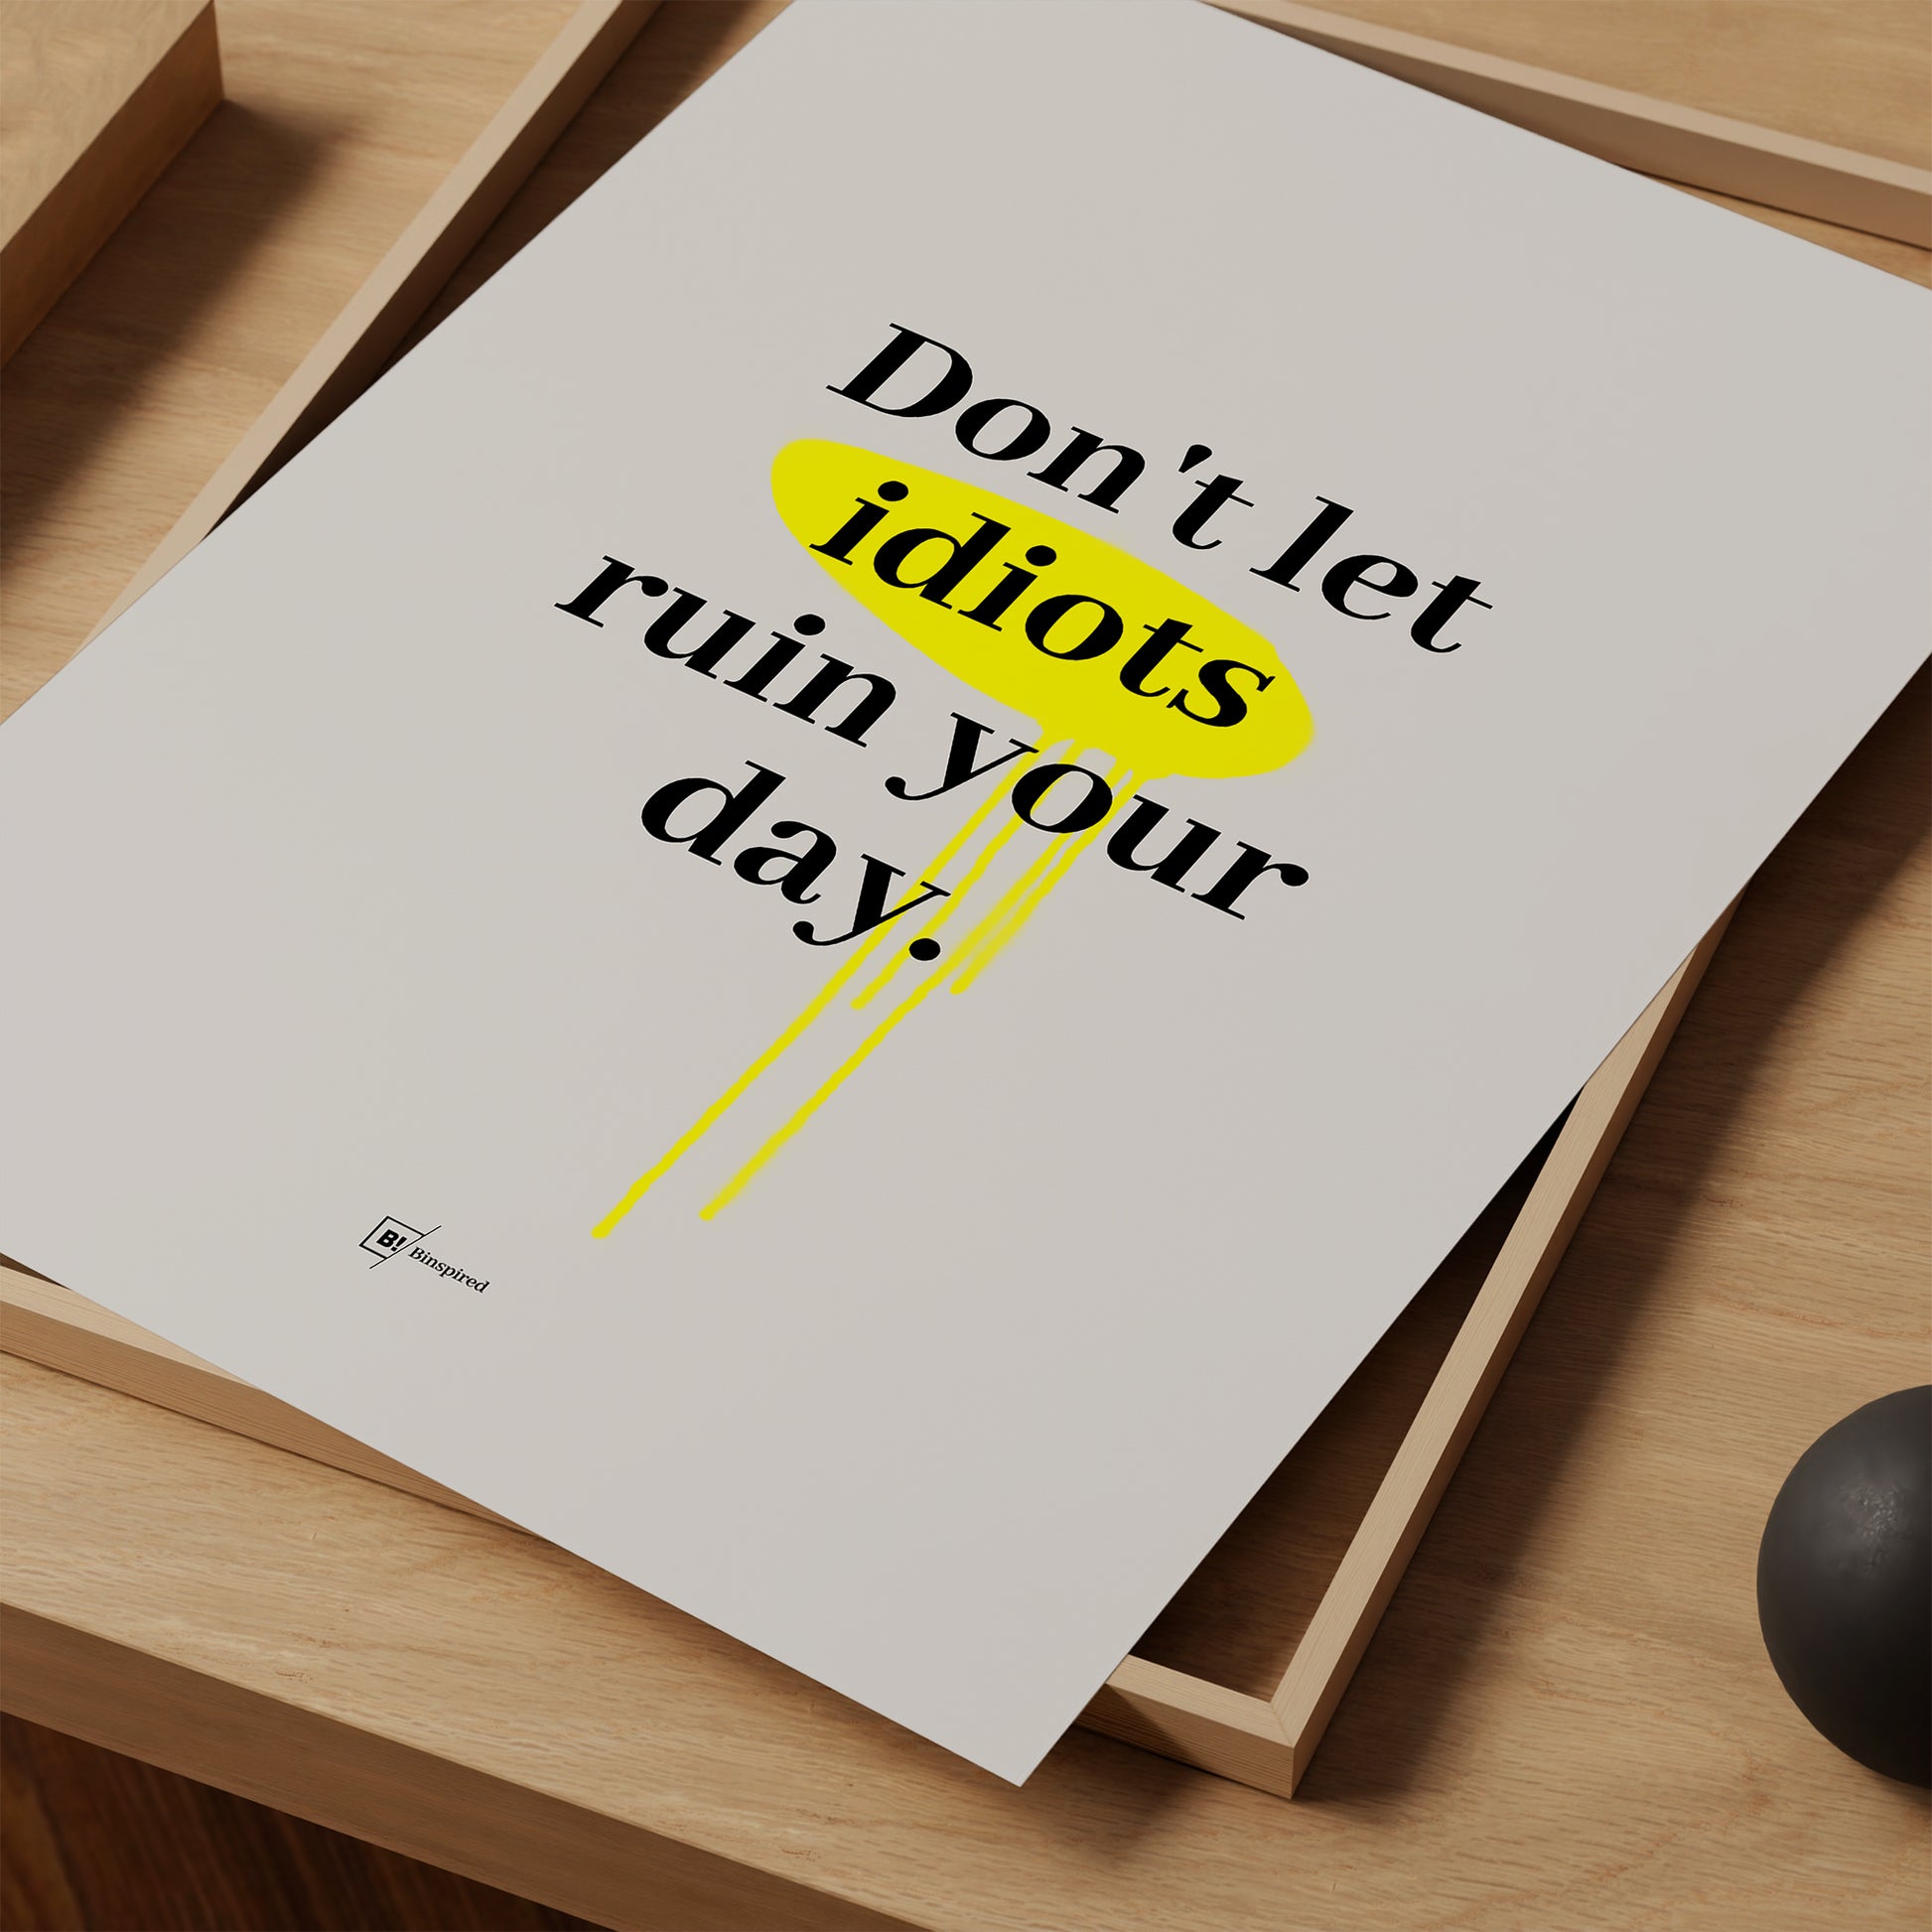 Be inspired by our "Don't let idiots ruin your day" quote art print! This artwork was printed using giclée on archival acid-free paper and is presented as a print close-up that captures its timeless beauty in every detail.